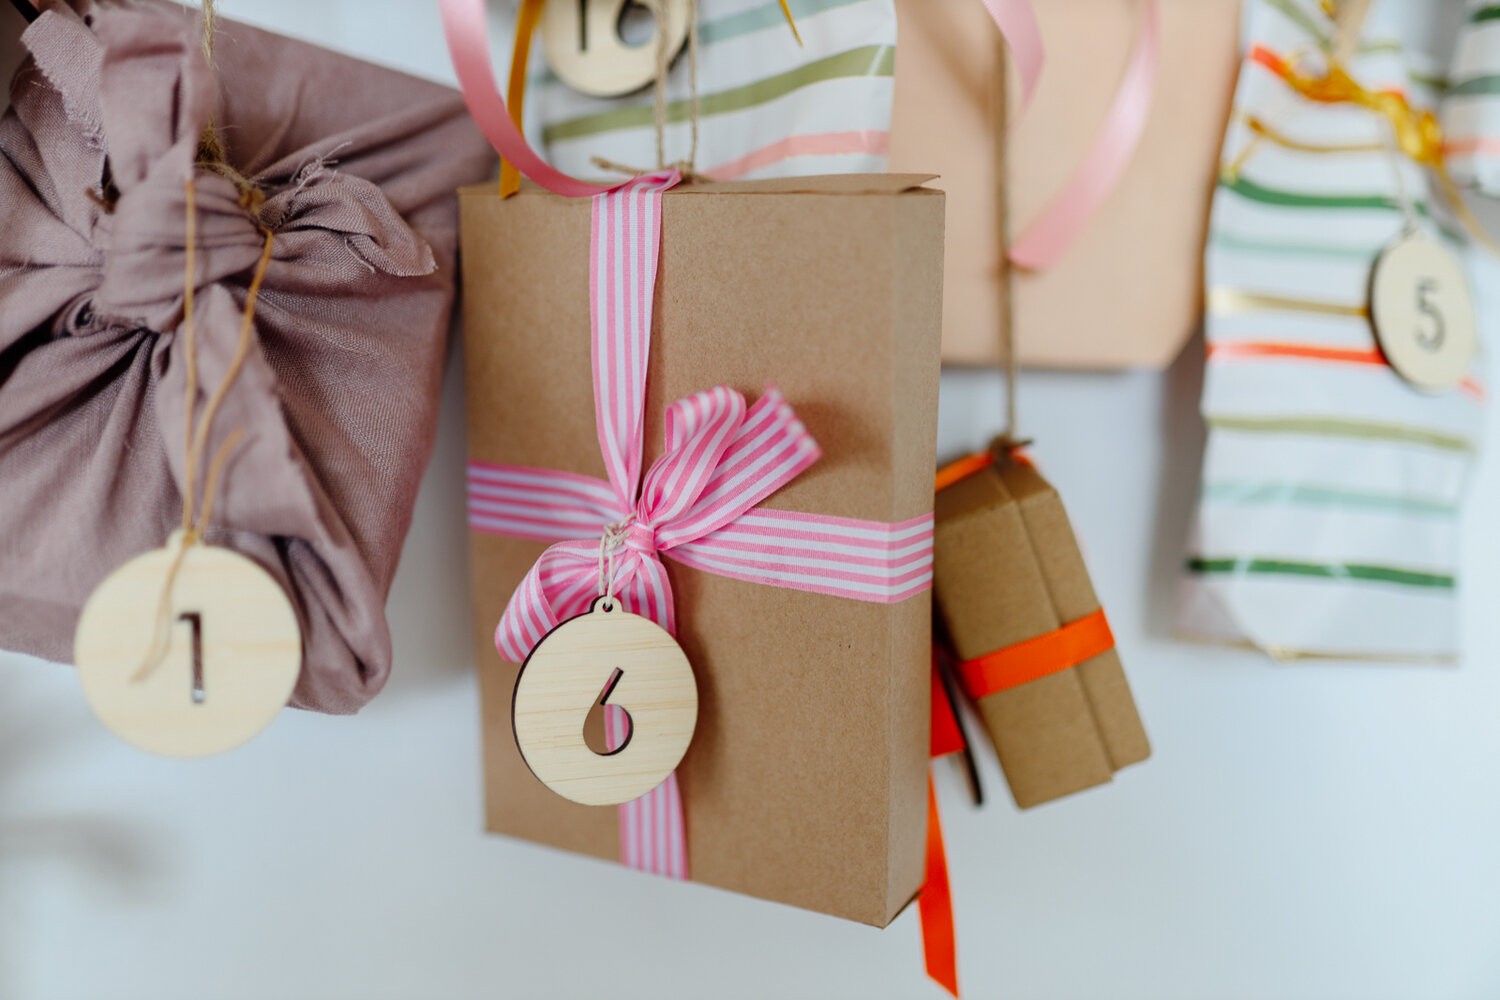 DIY Large Gift Box From Poster Board 